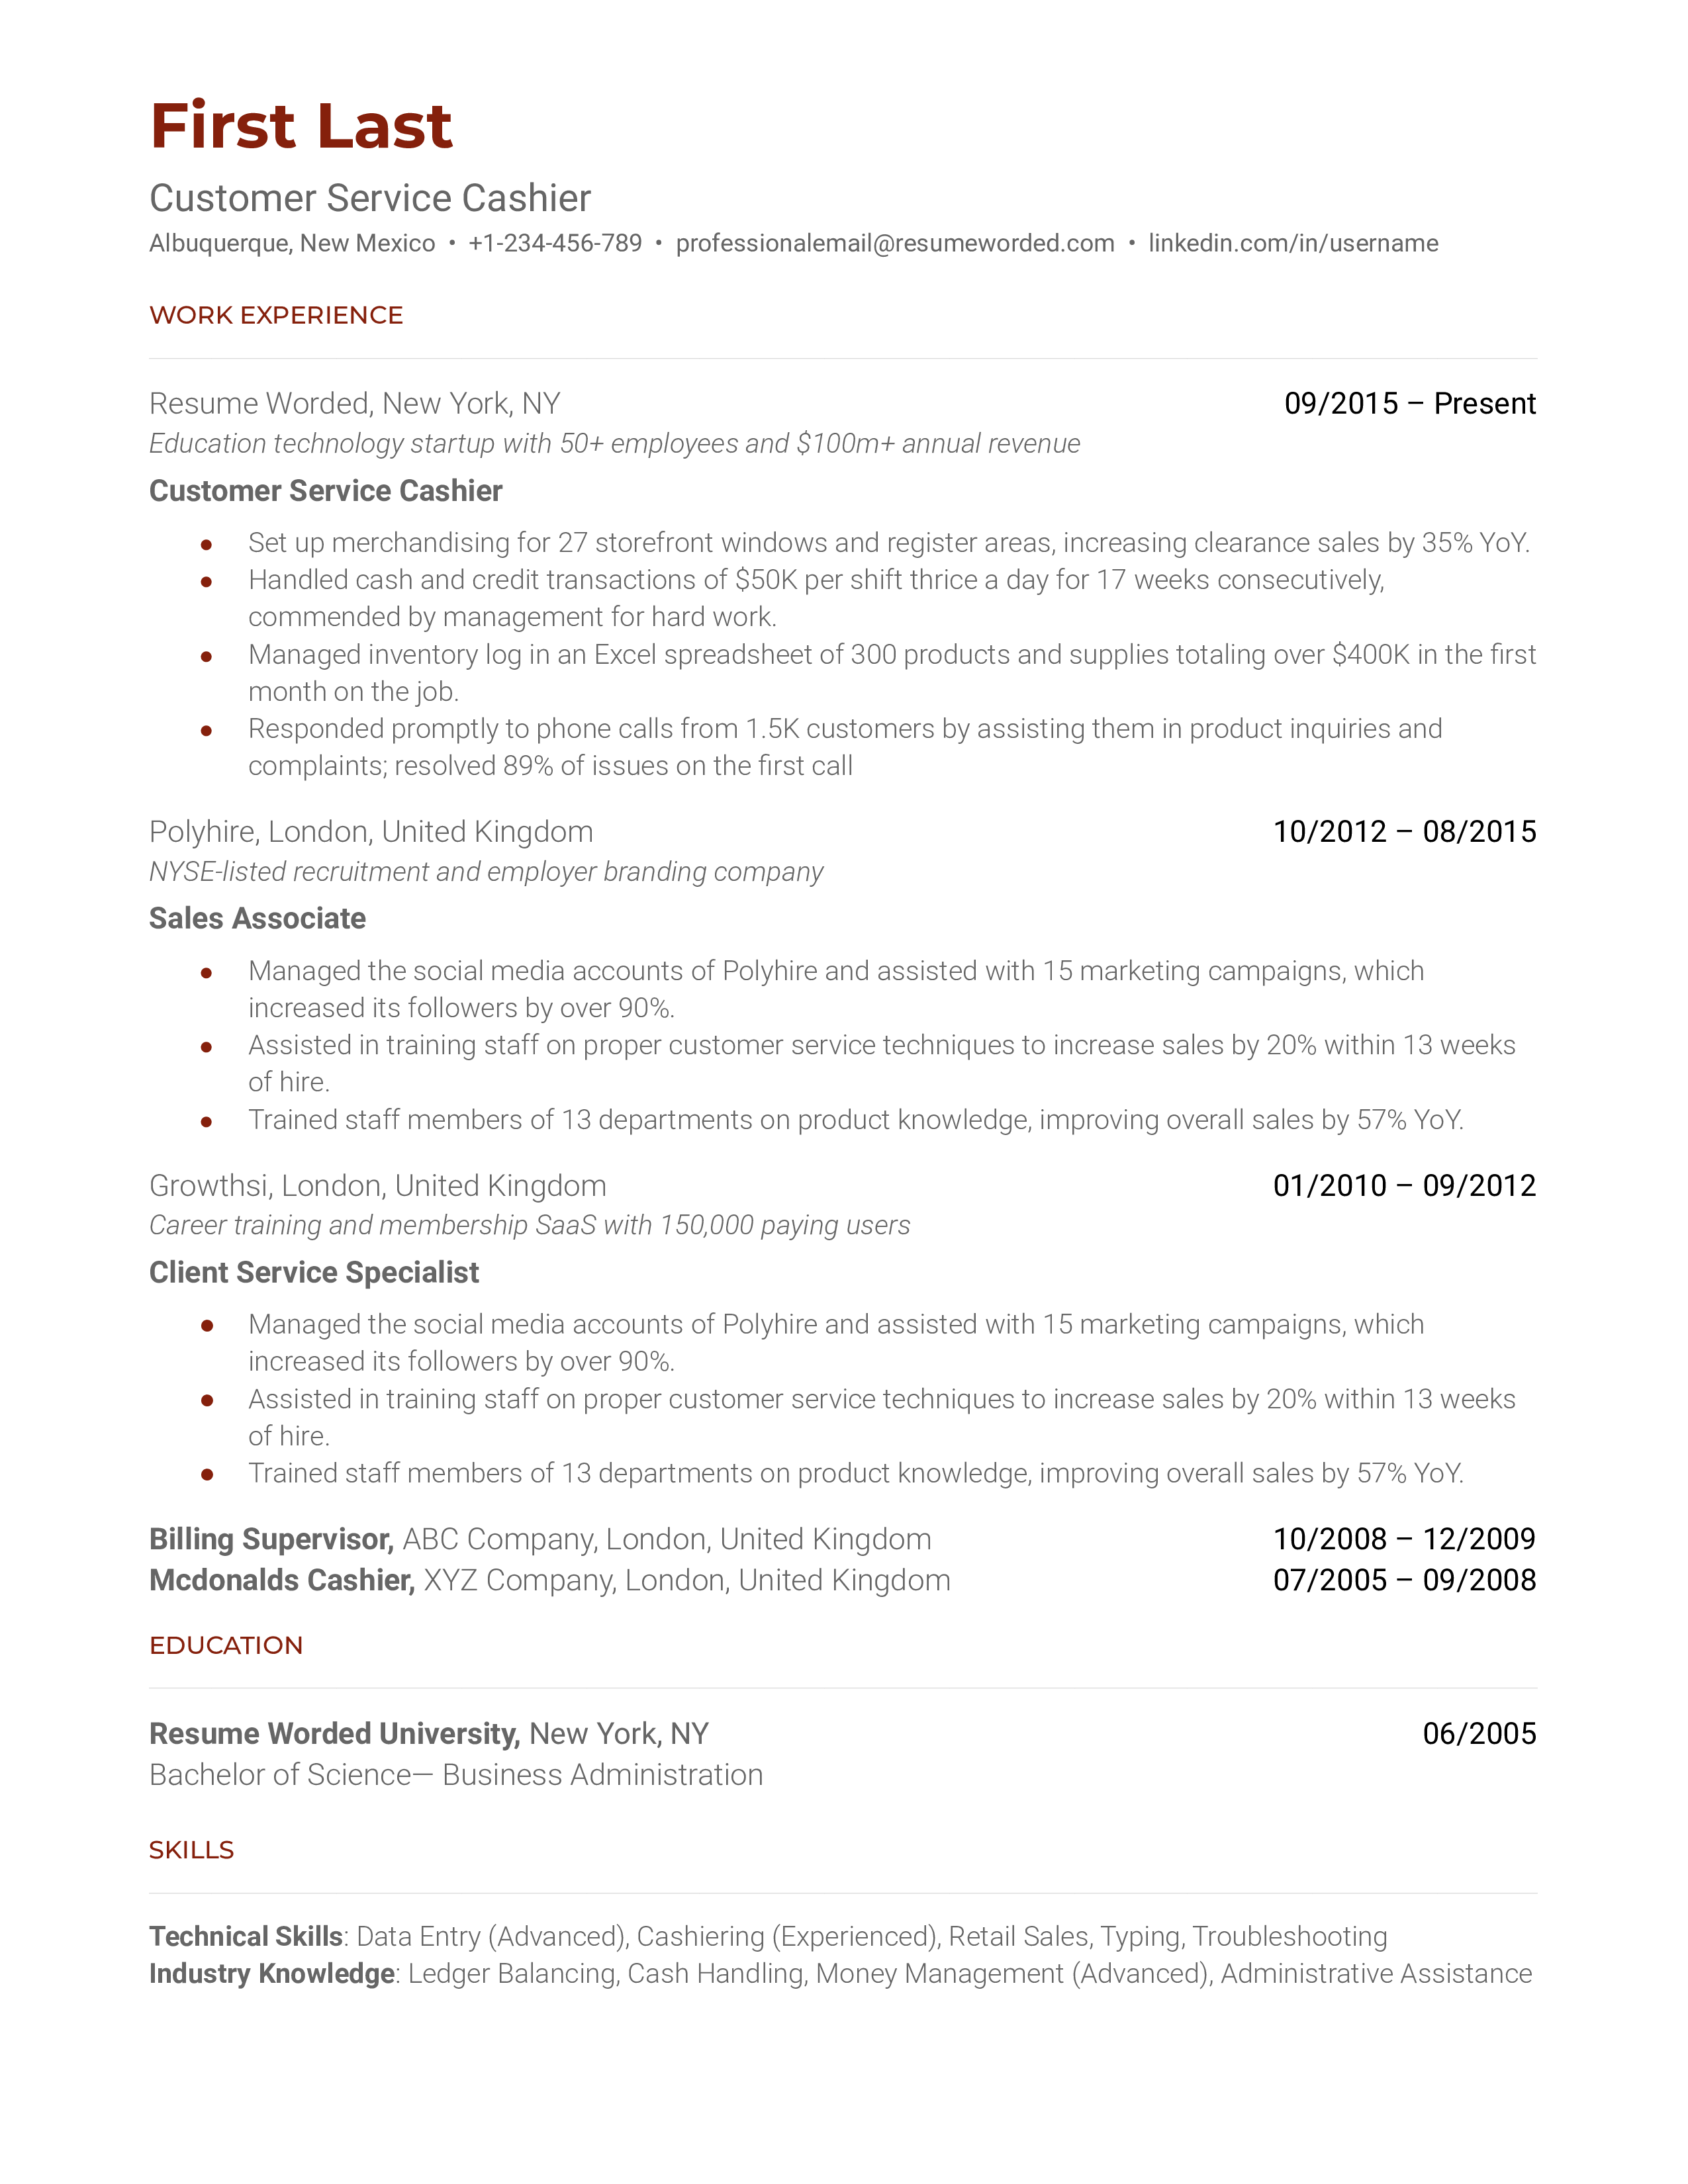 A customer service cashier resume sample that highlights the applicant’s financial experience and cashier tools.